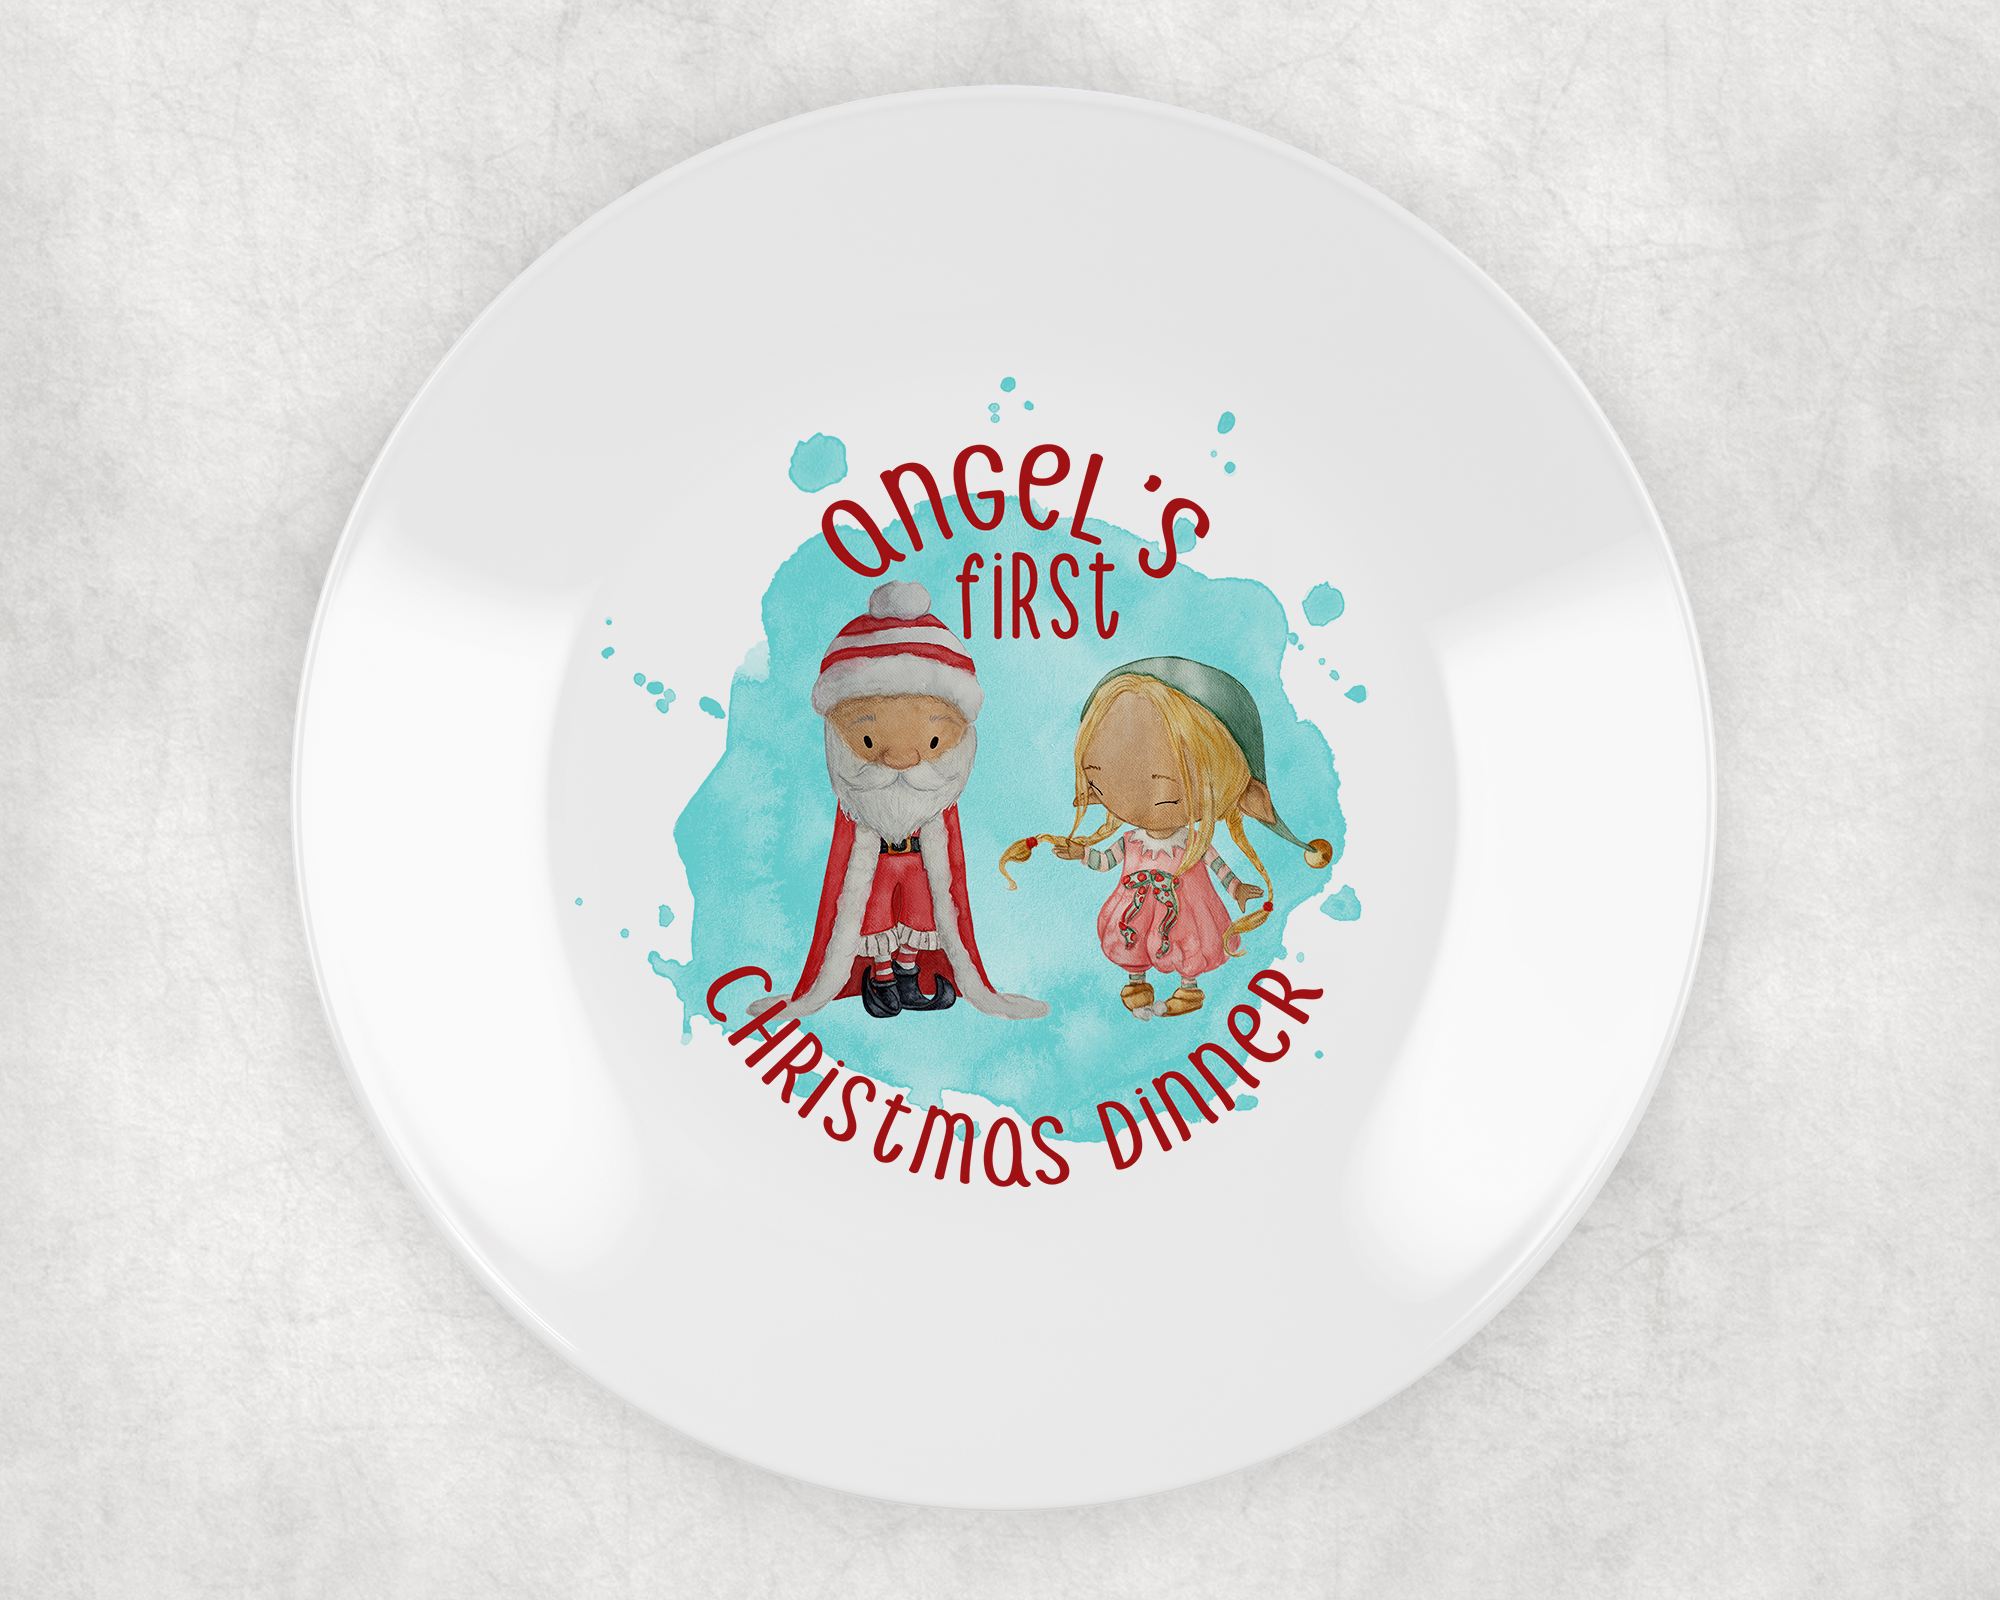 my first christmas plate personalised with santa and elf. ideal plastic non breakable plate. santa girl elf blond hair blue background